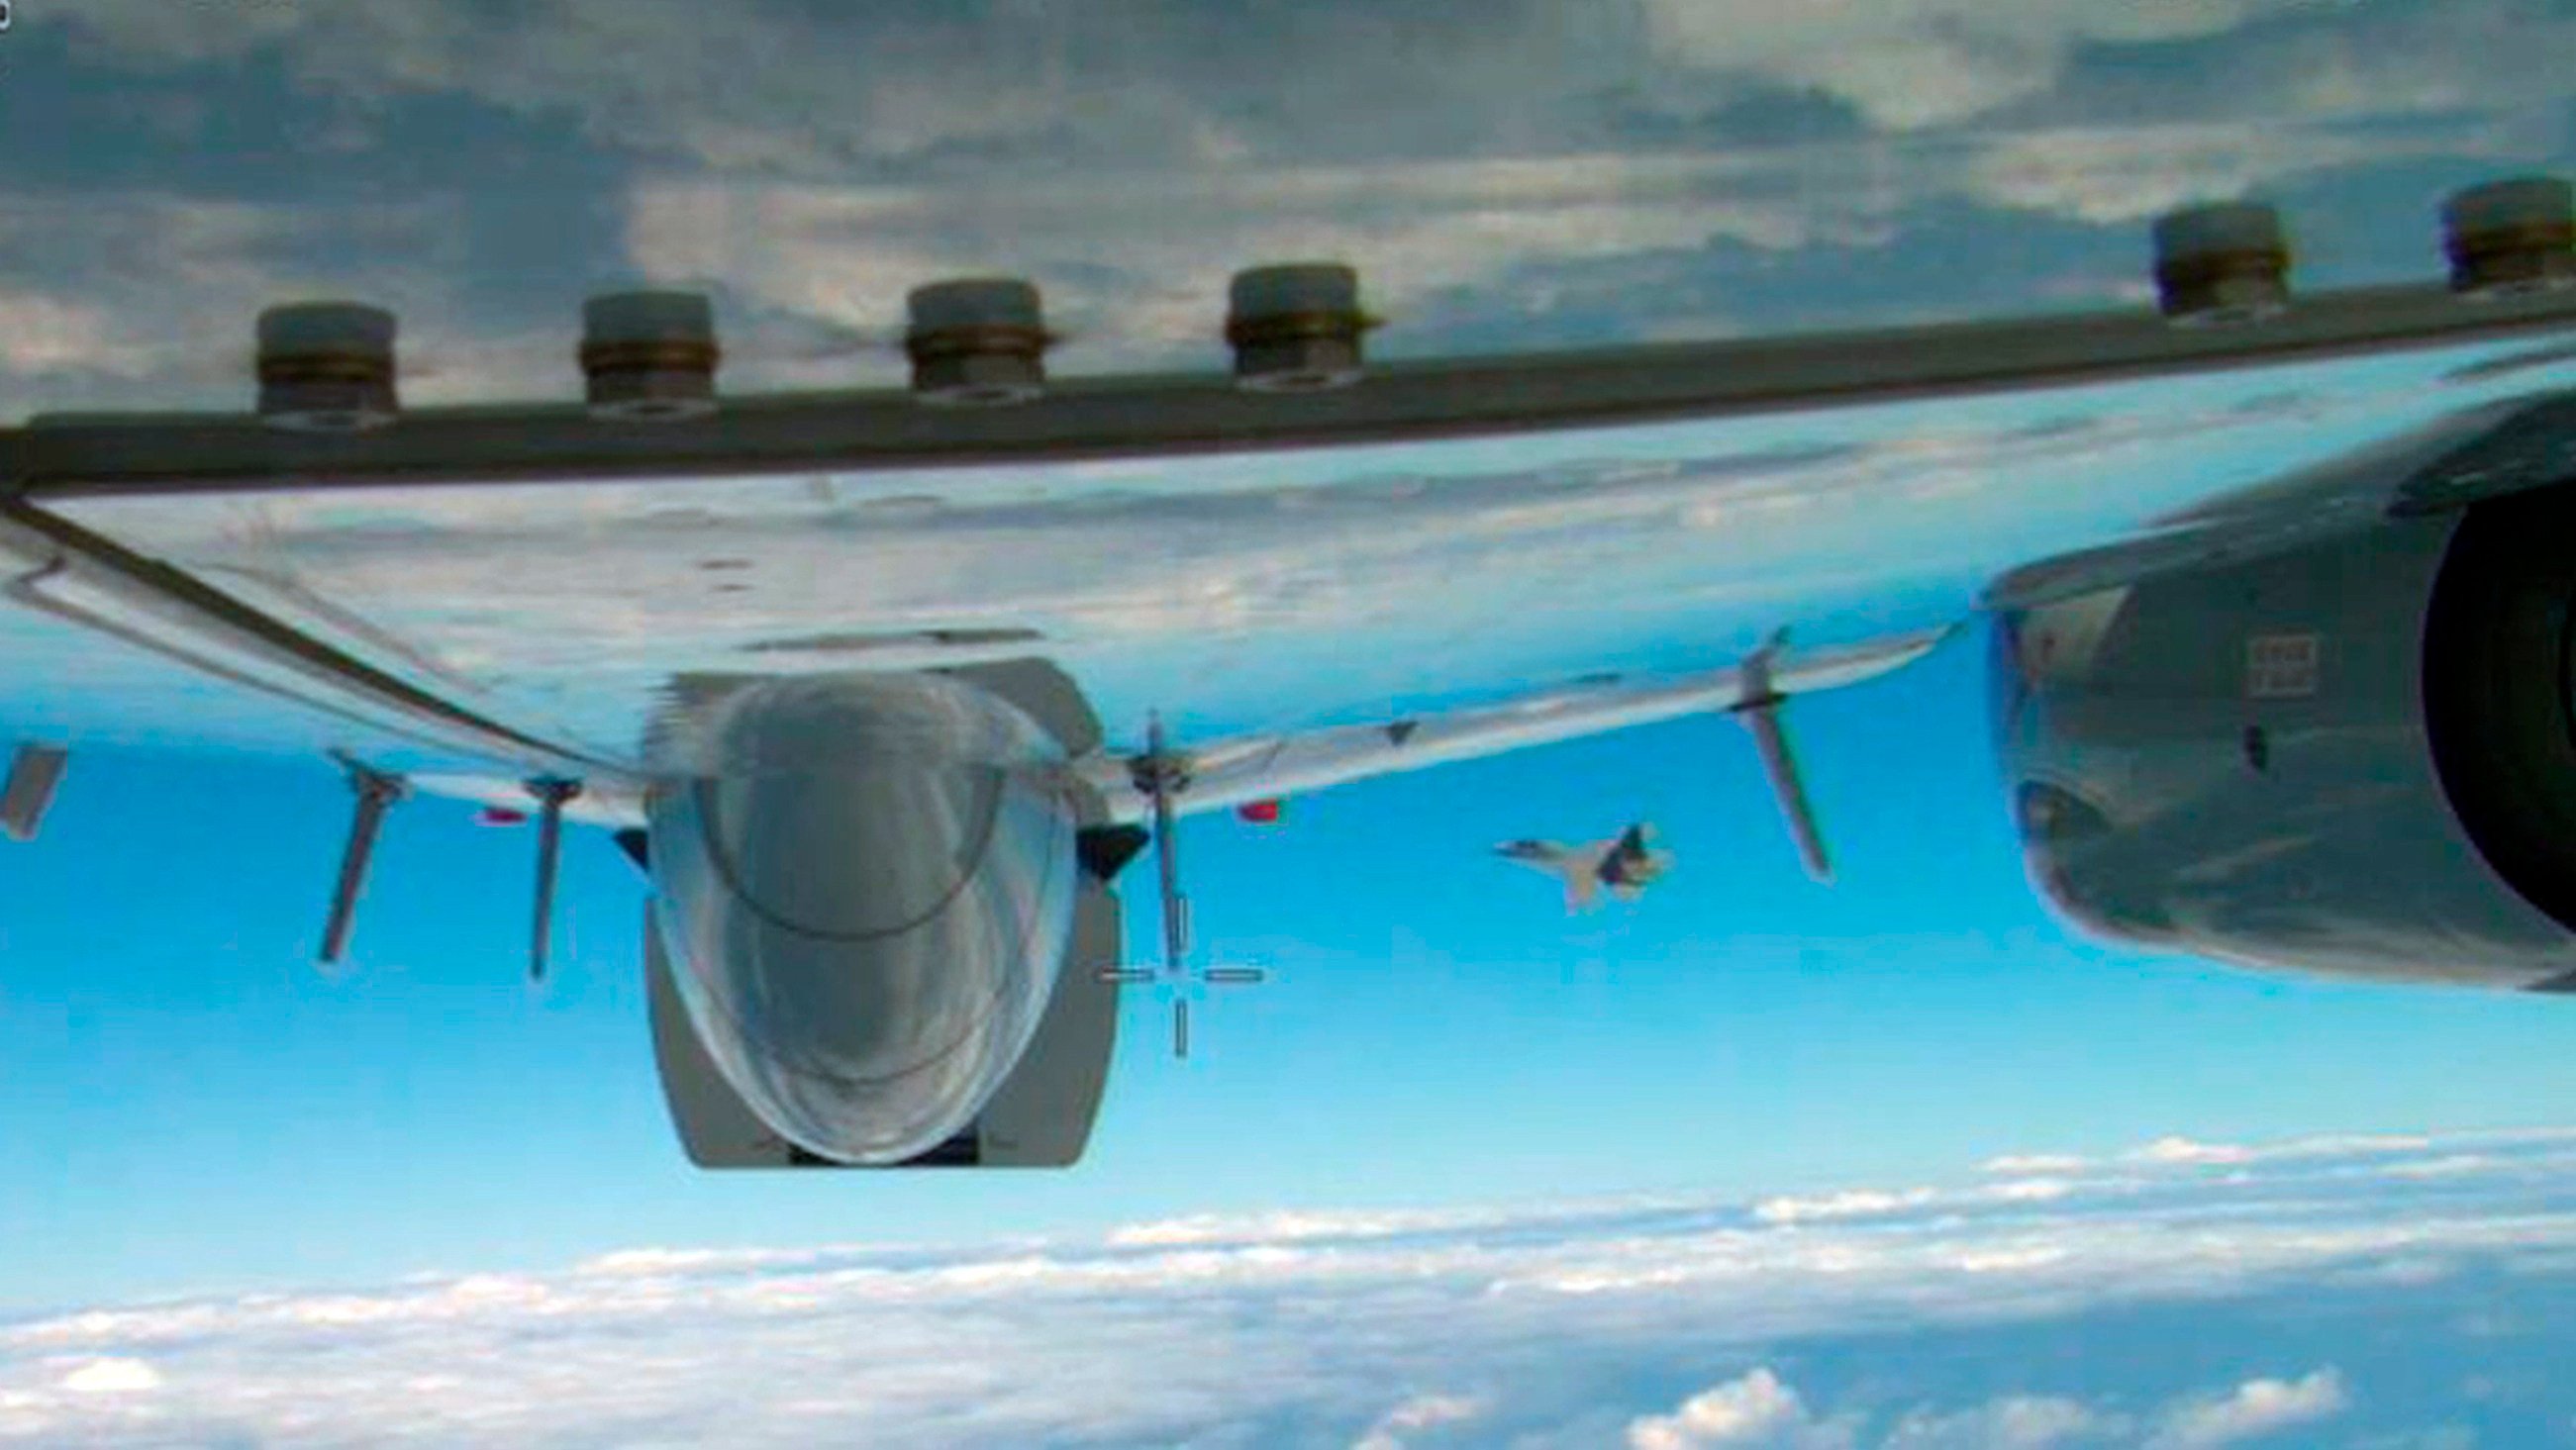 An image released by the Pentagon shows an intercept of a US warplane by Chinese aircraft in the Pacific Ocean in January. Photo: US Department of Defence via AP